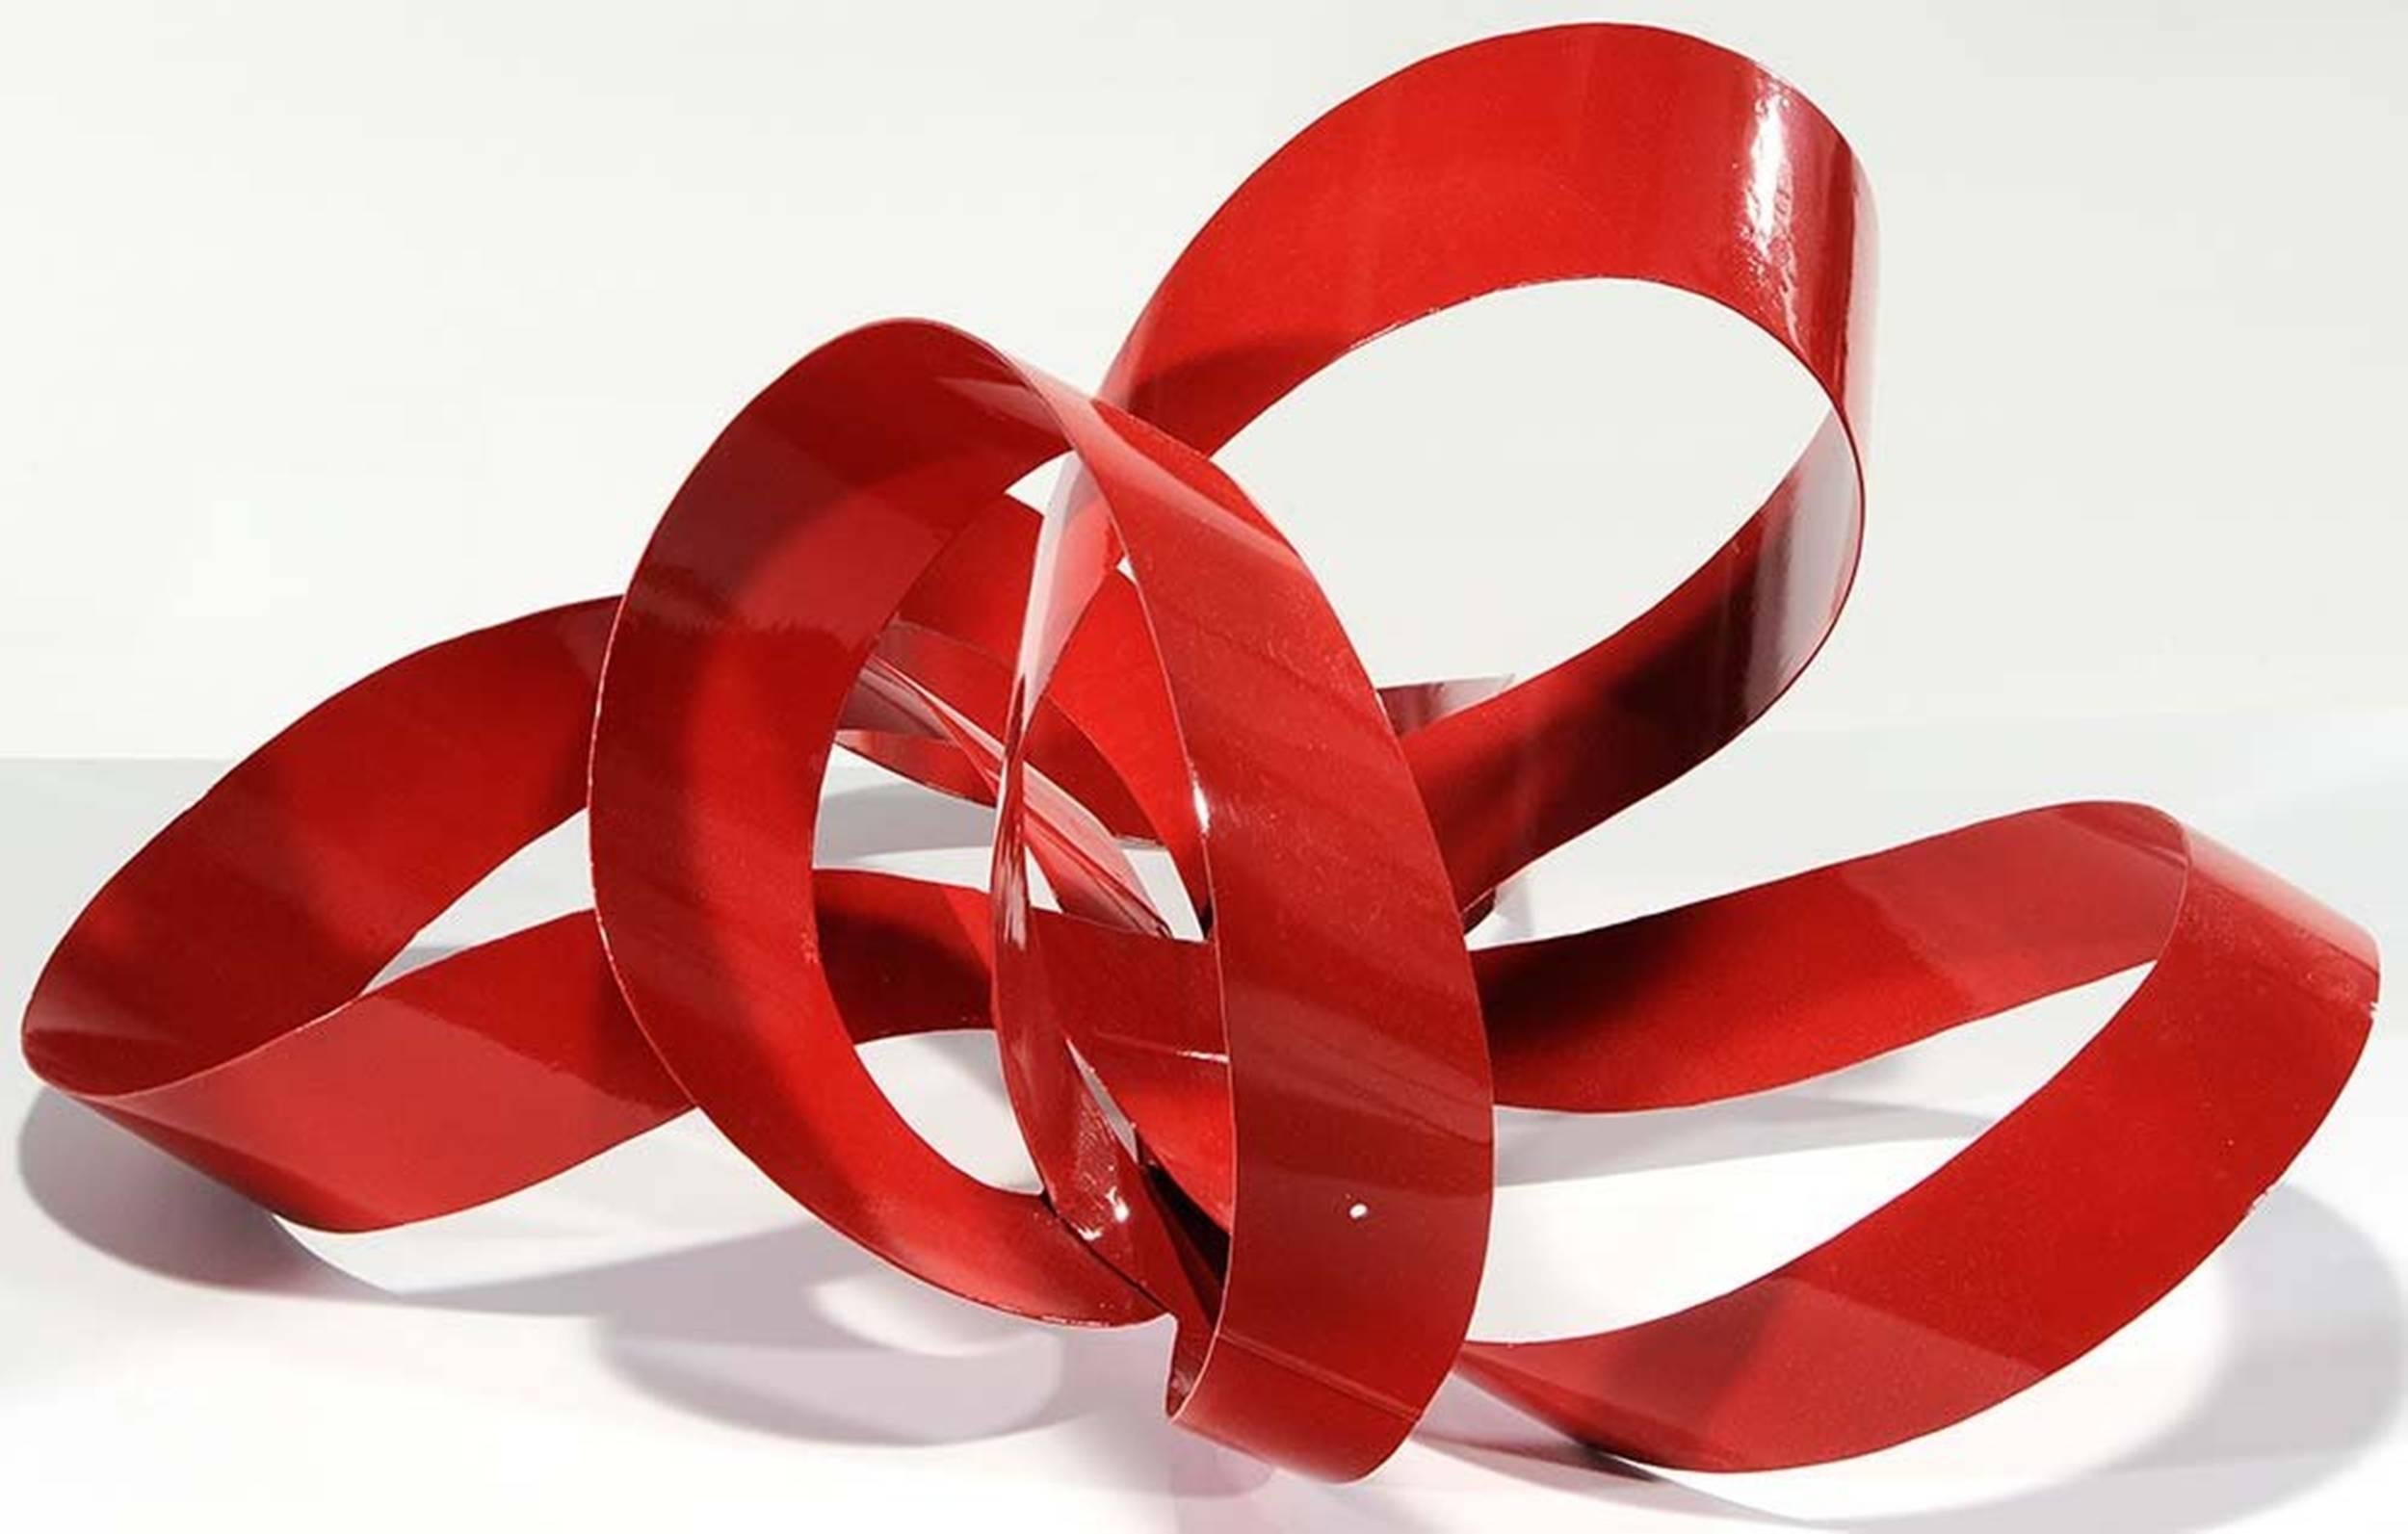 American  One of a Kind Red Ribbon Sculpture by Paul Chilkov 